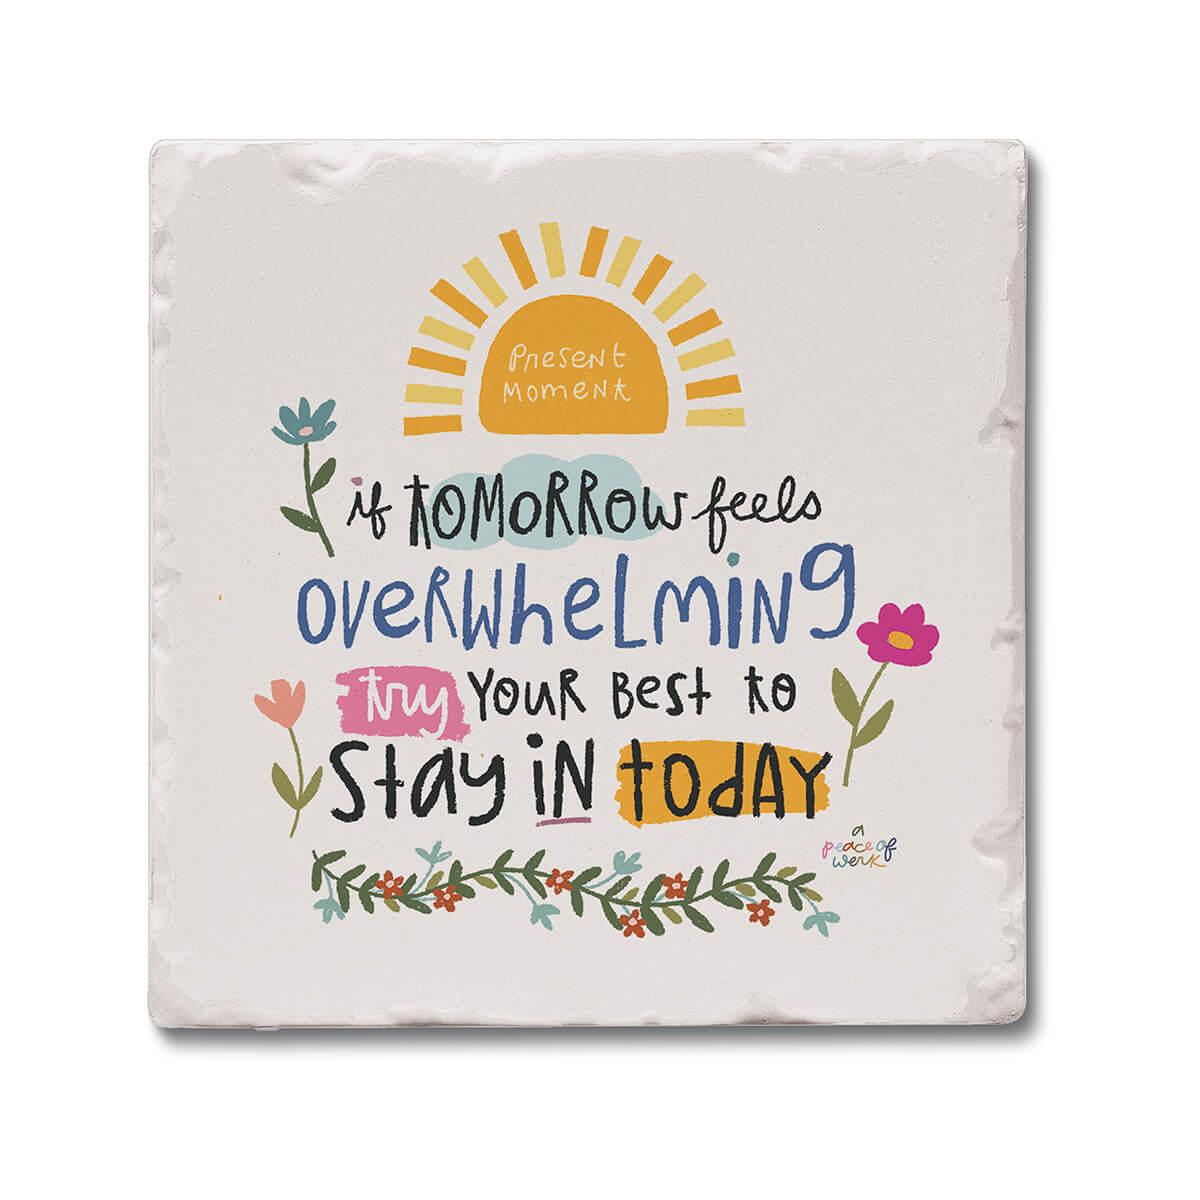  Stay In Today Single Tile Coaster